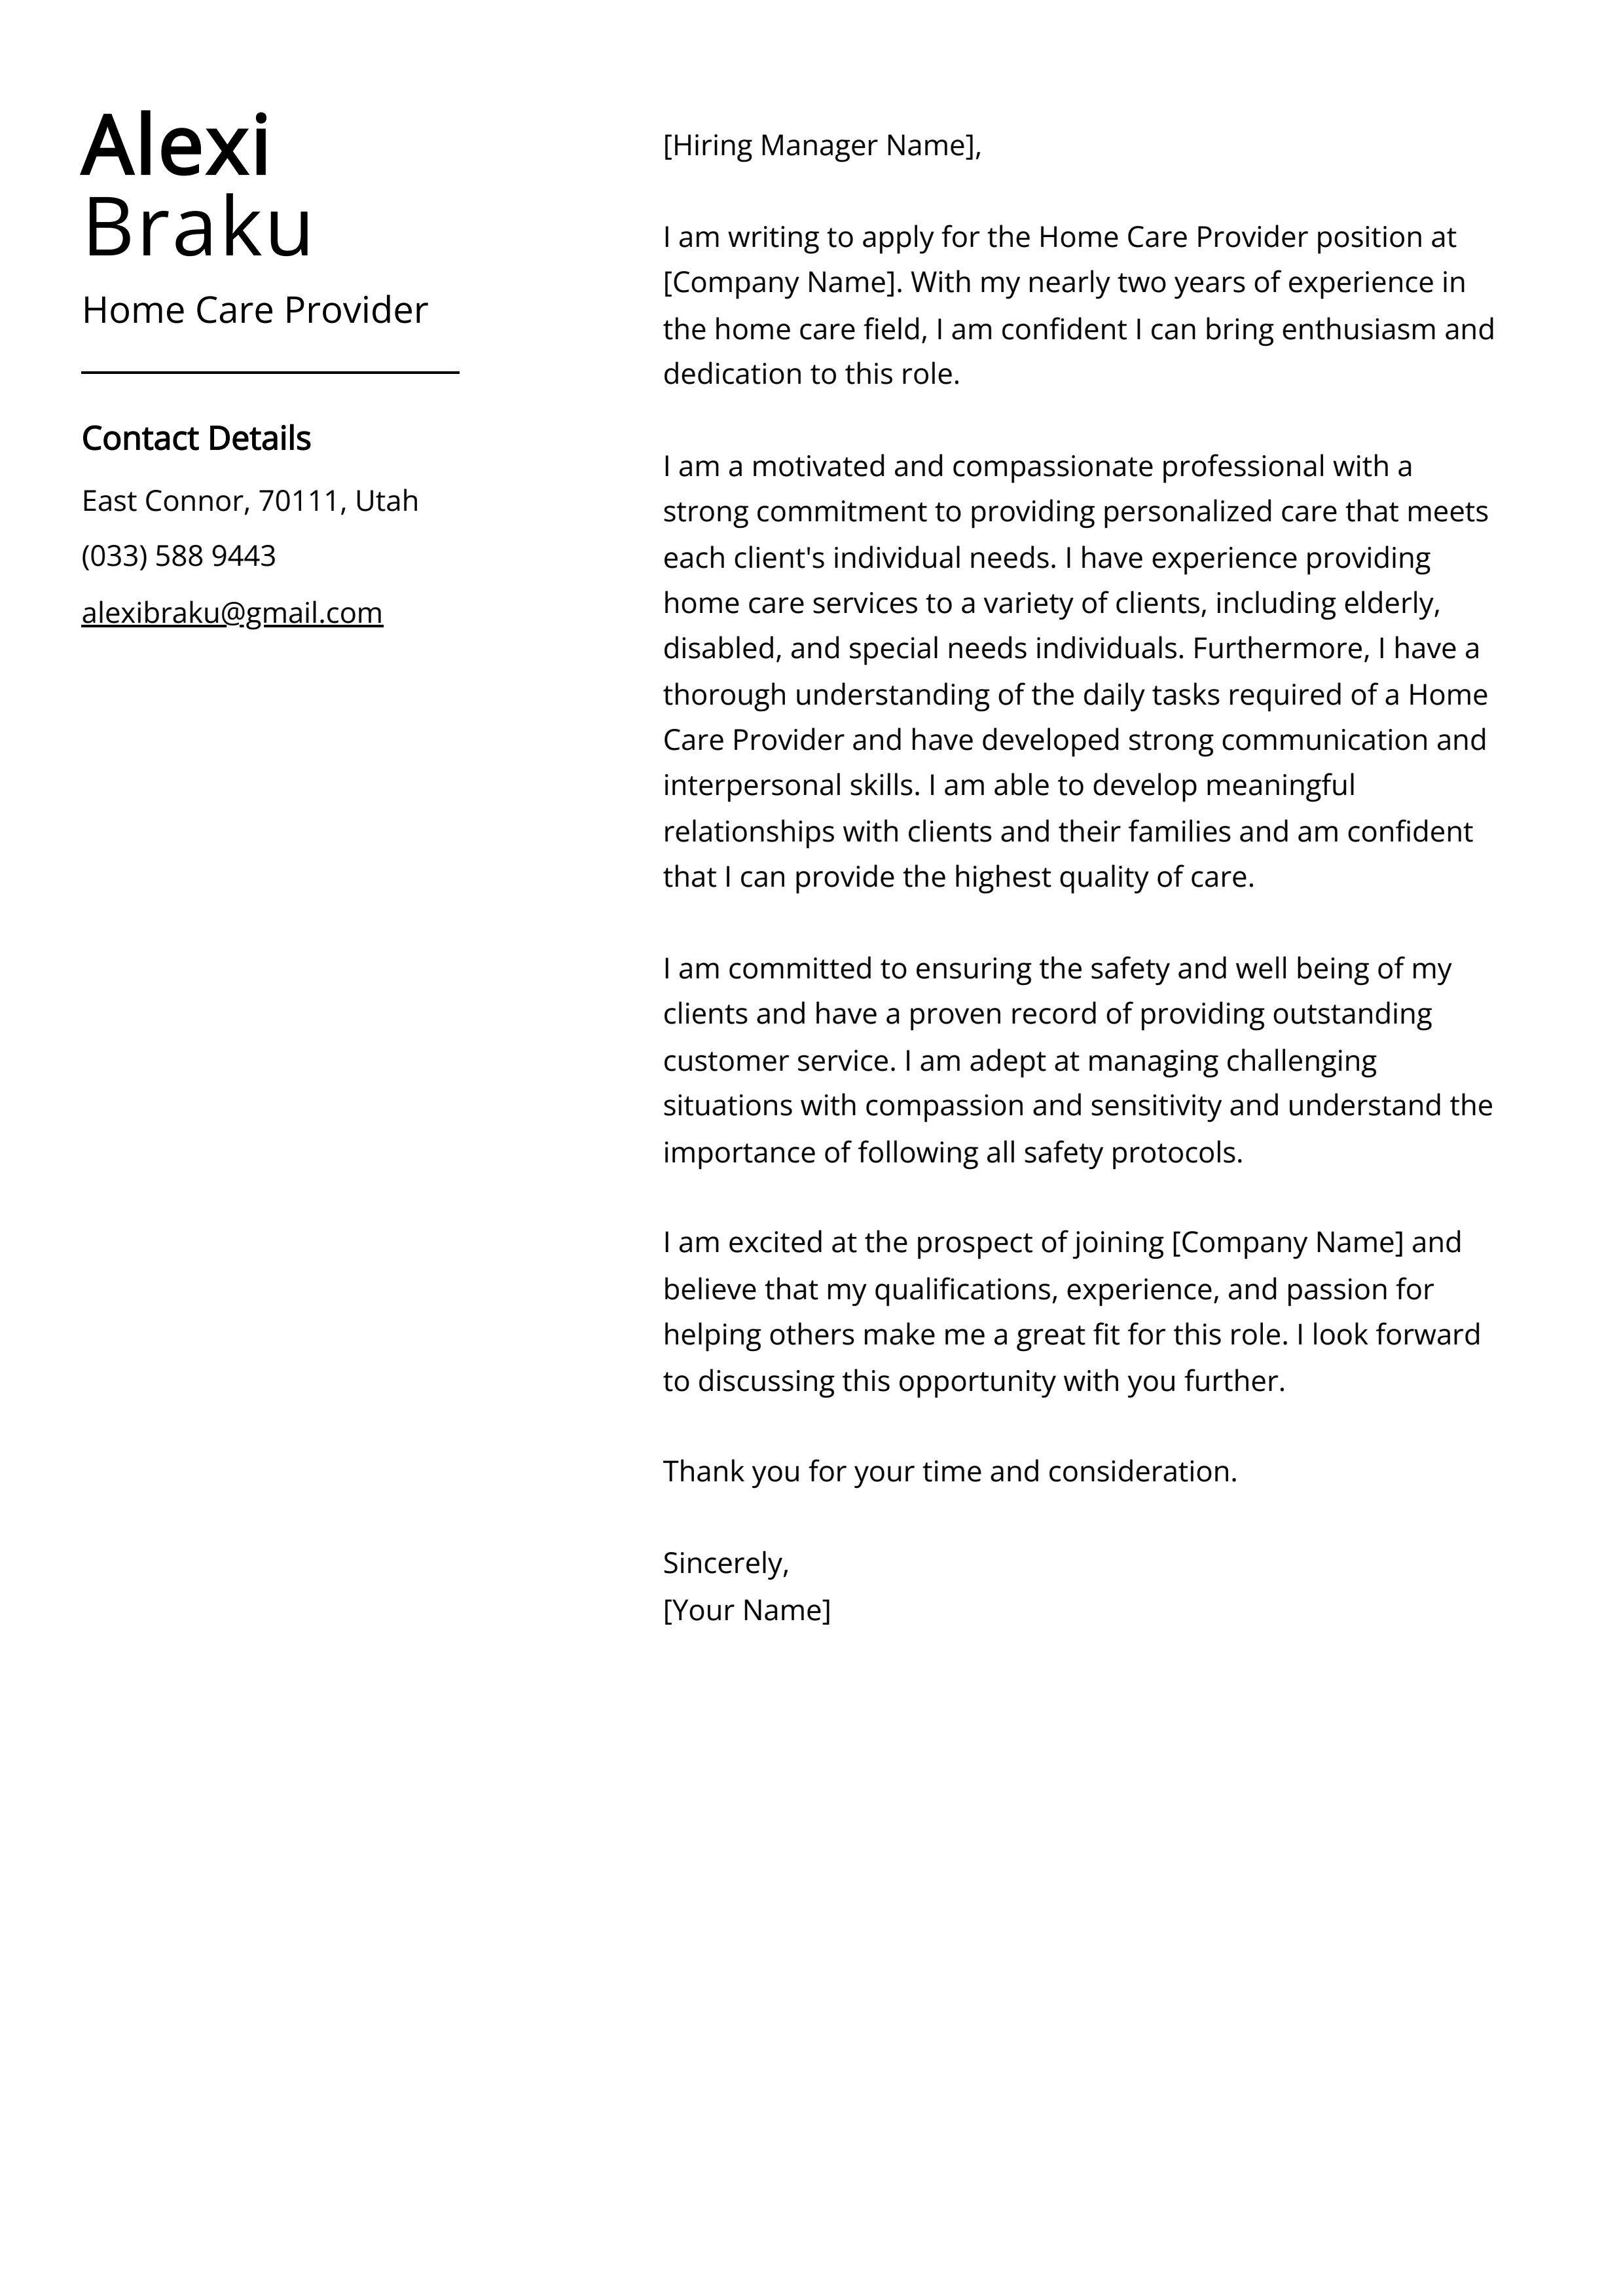 Home Care Provider Cover Letter Example